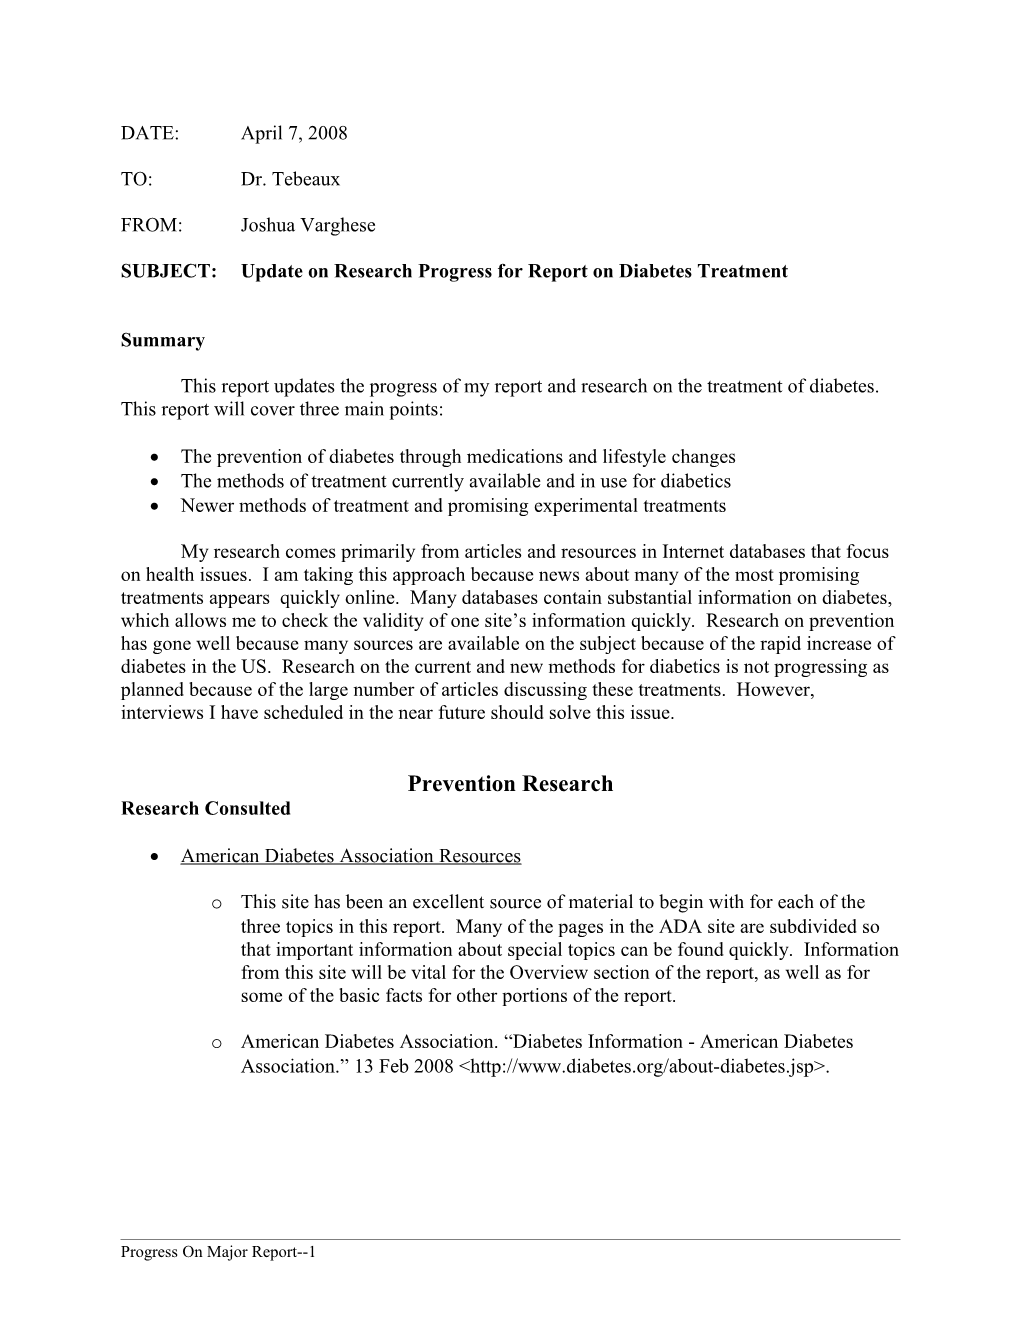 SUBJECT:Update on Research Progress for Report on Diabetes Treatment